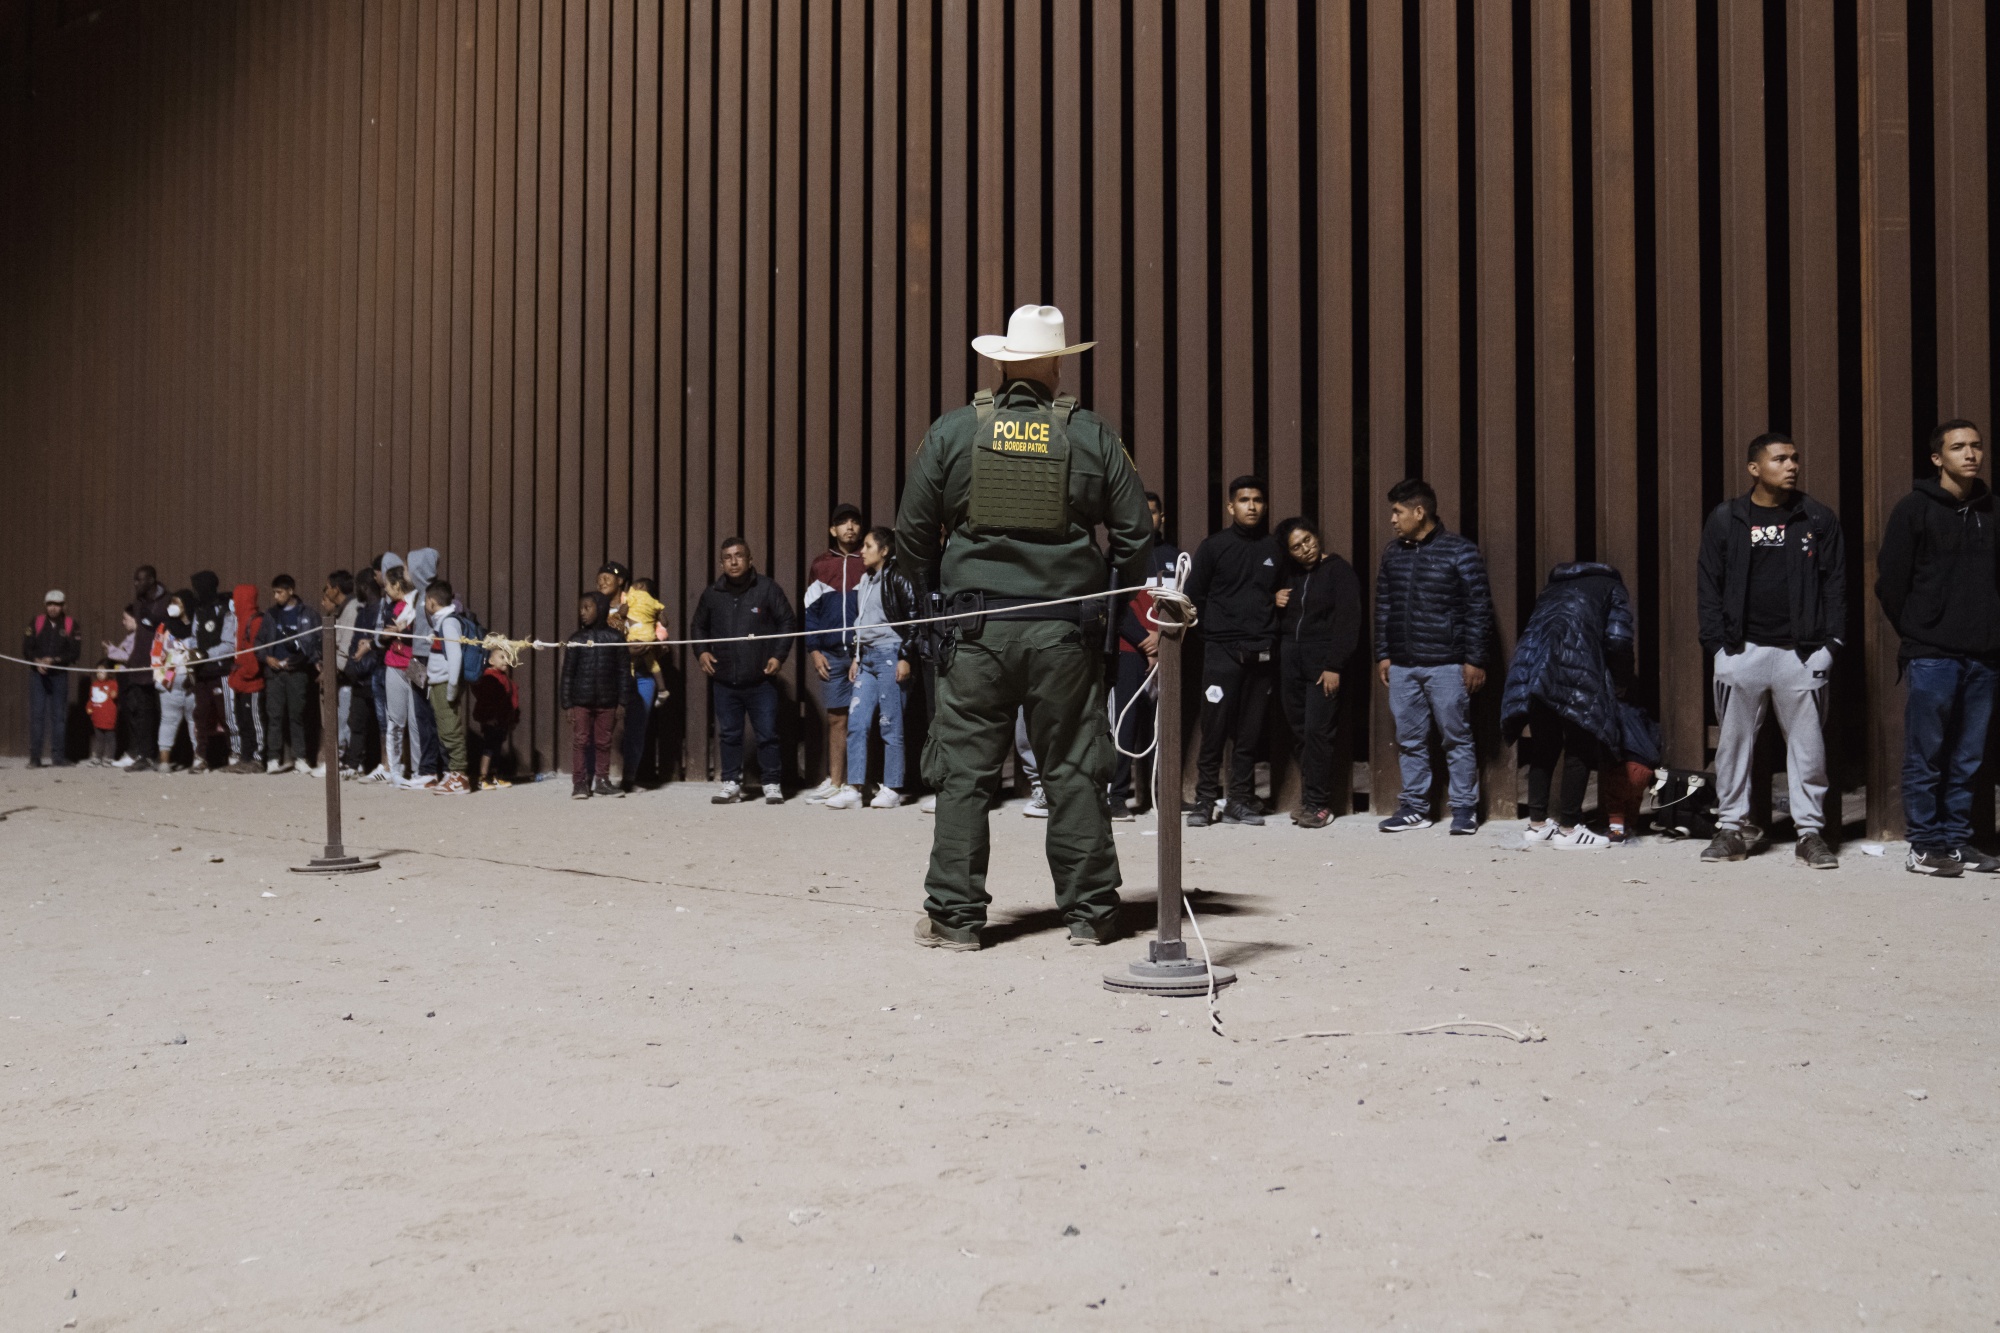 U.S. Border Patrol chief to retire after end of Title 42